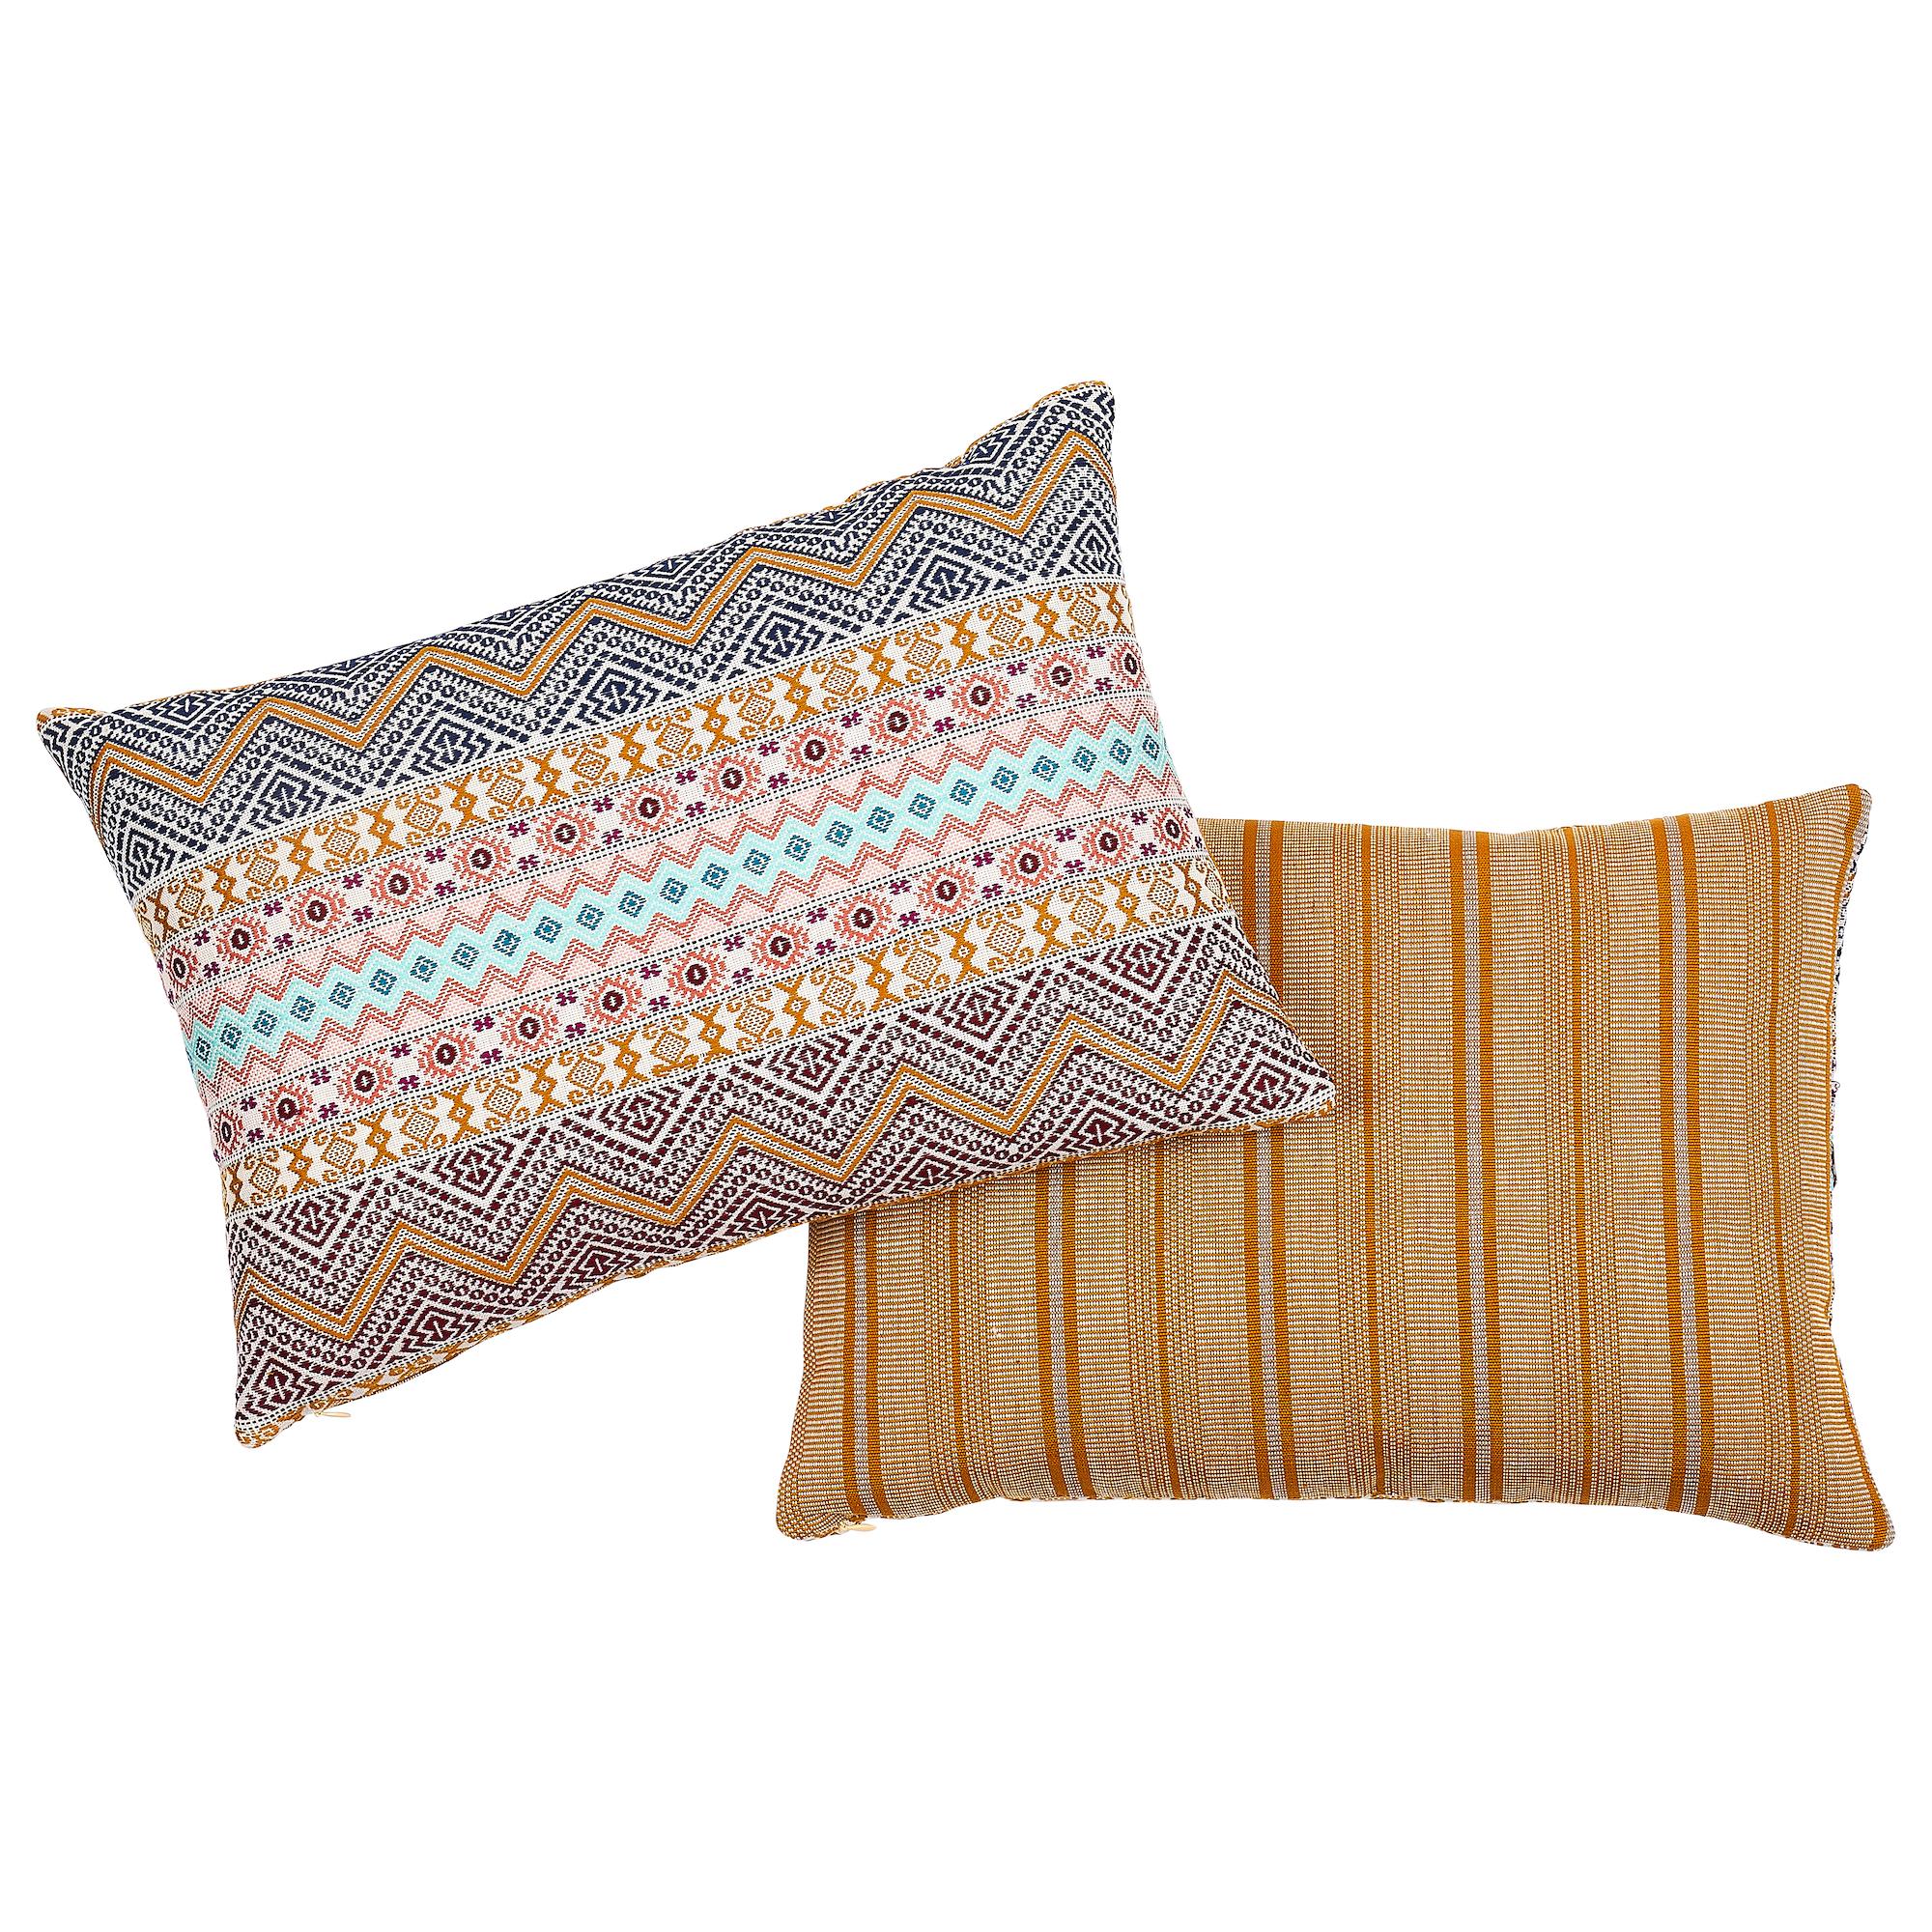 Other Schumacher Holmul & Panan Stripe Pillow in Autumn For Sale